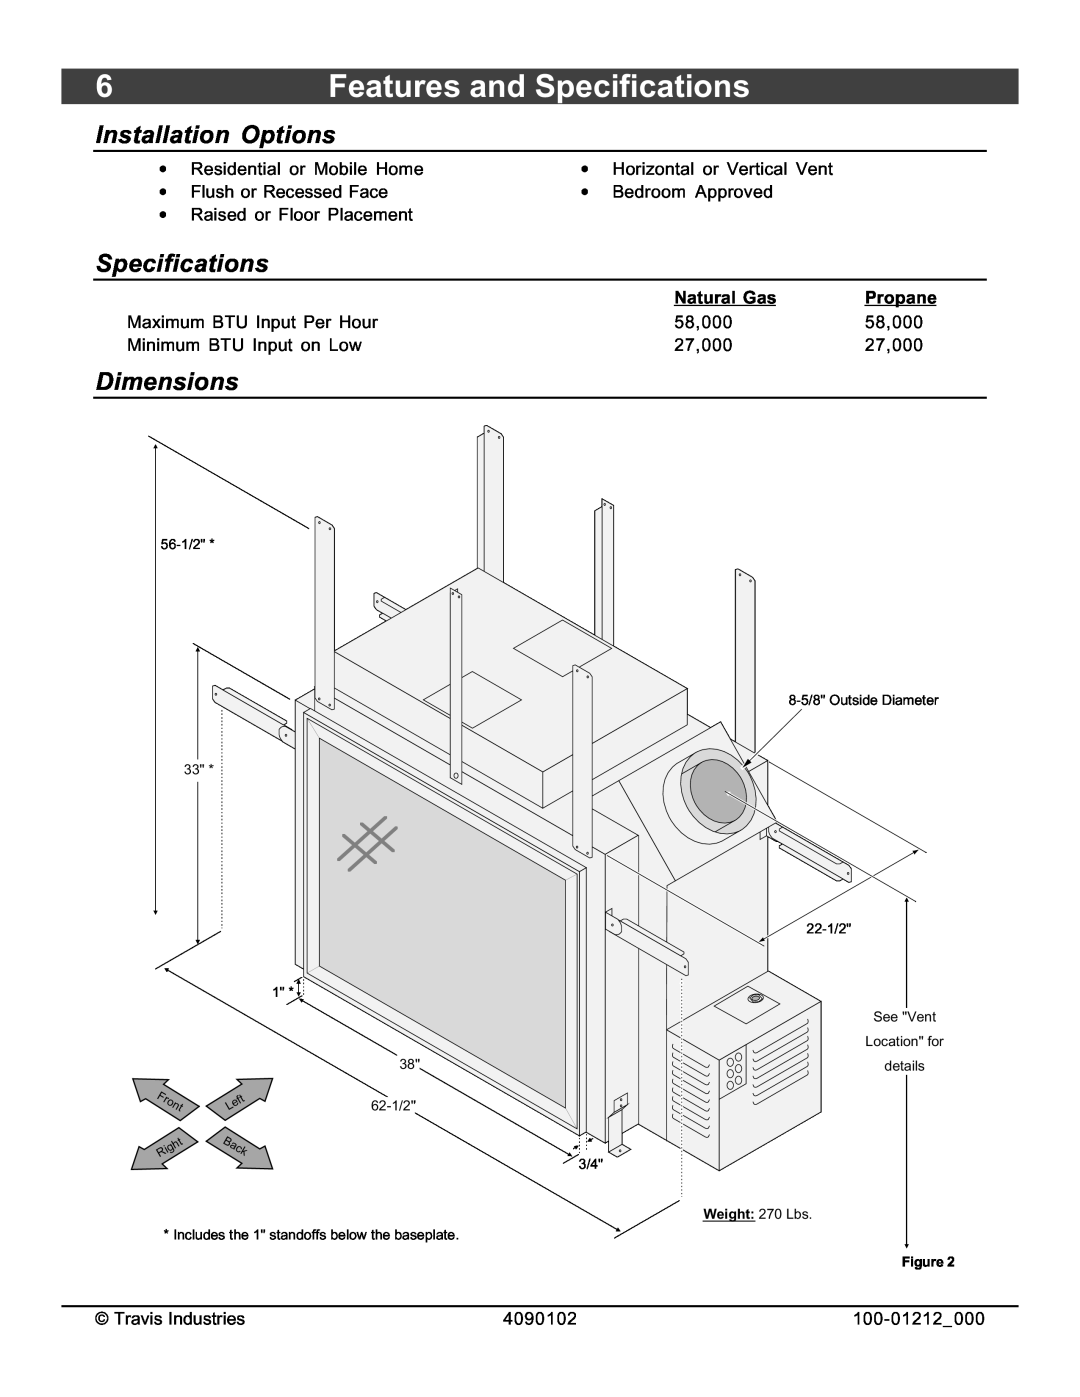 FireplaceXtrordinair 36CF installation manual Features and Specifications, Installation Options, Dimensions 